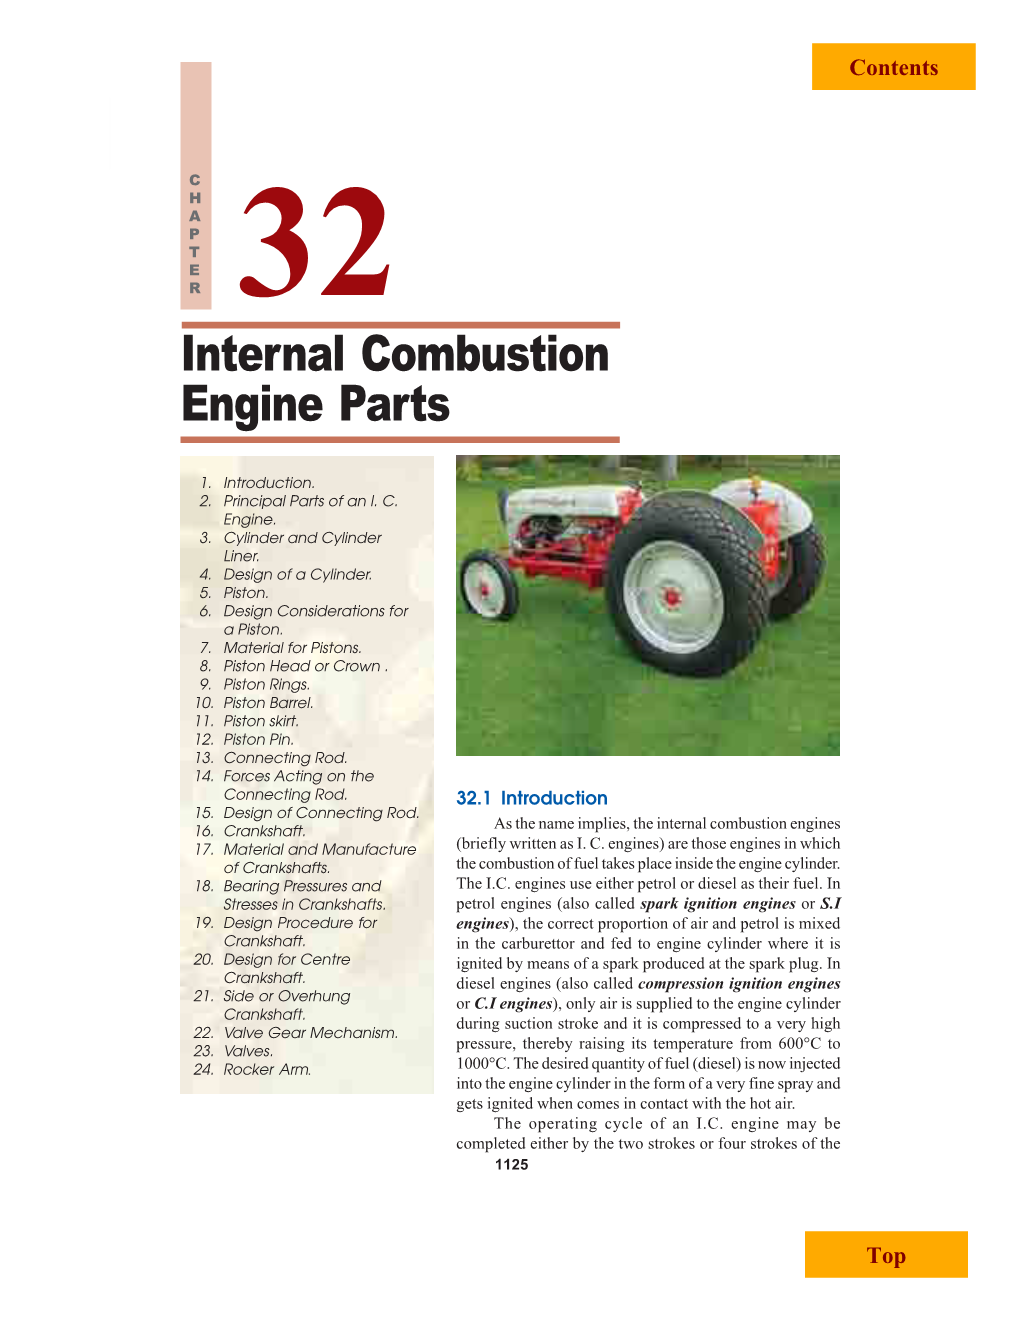 Internal Combustion Engine Parts  1125